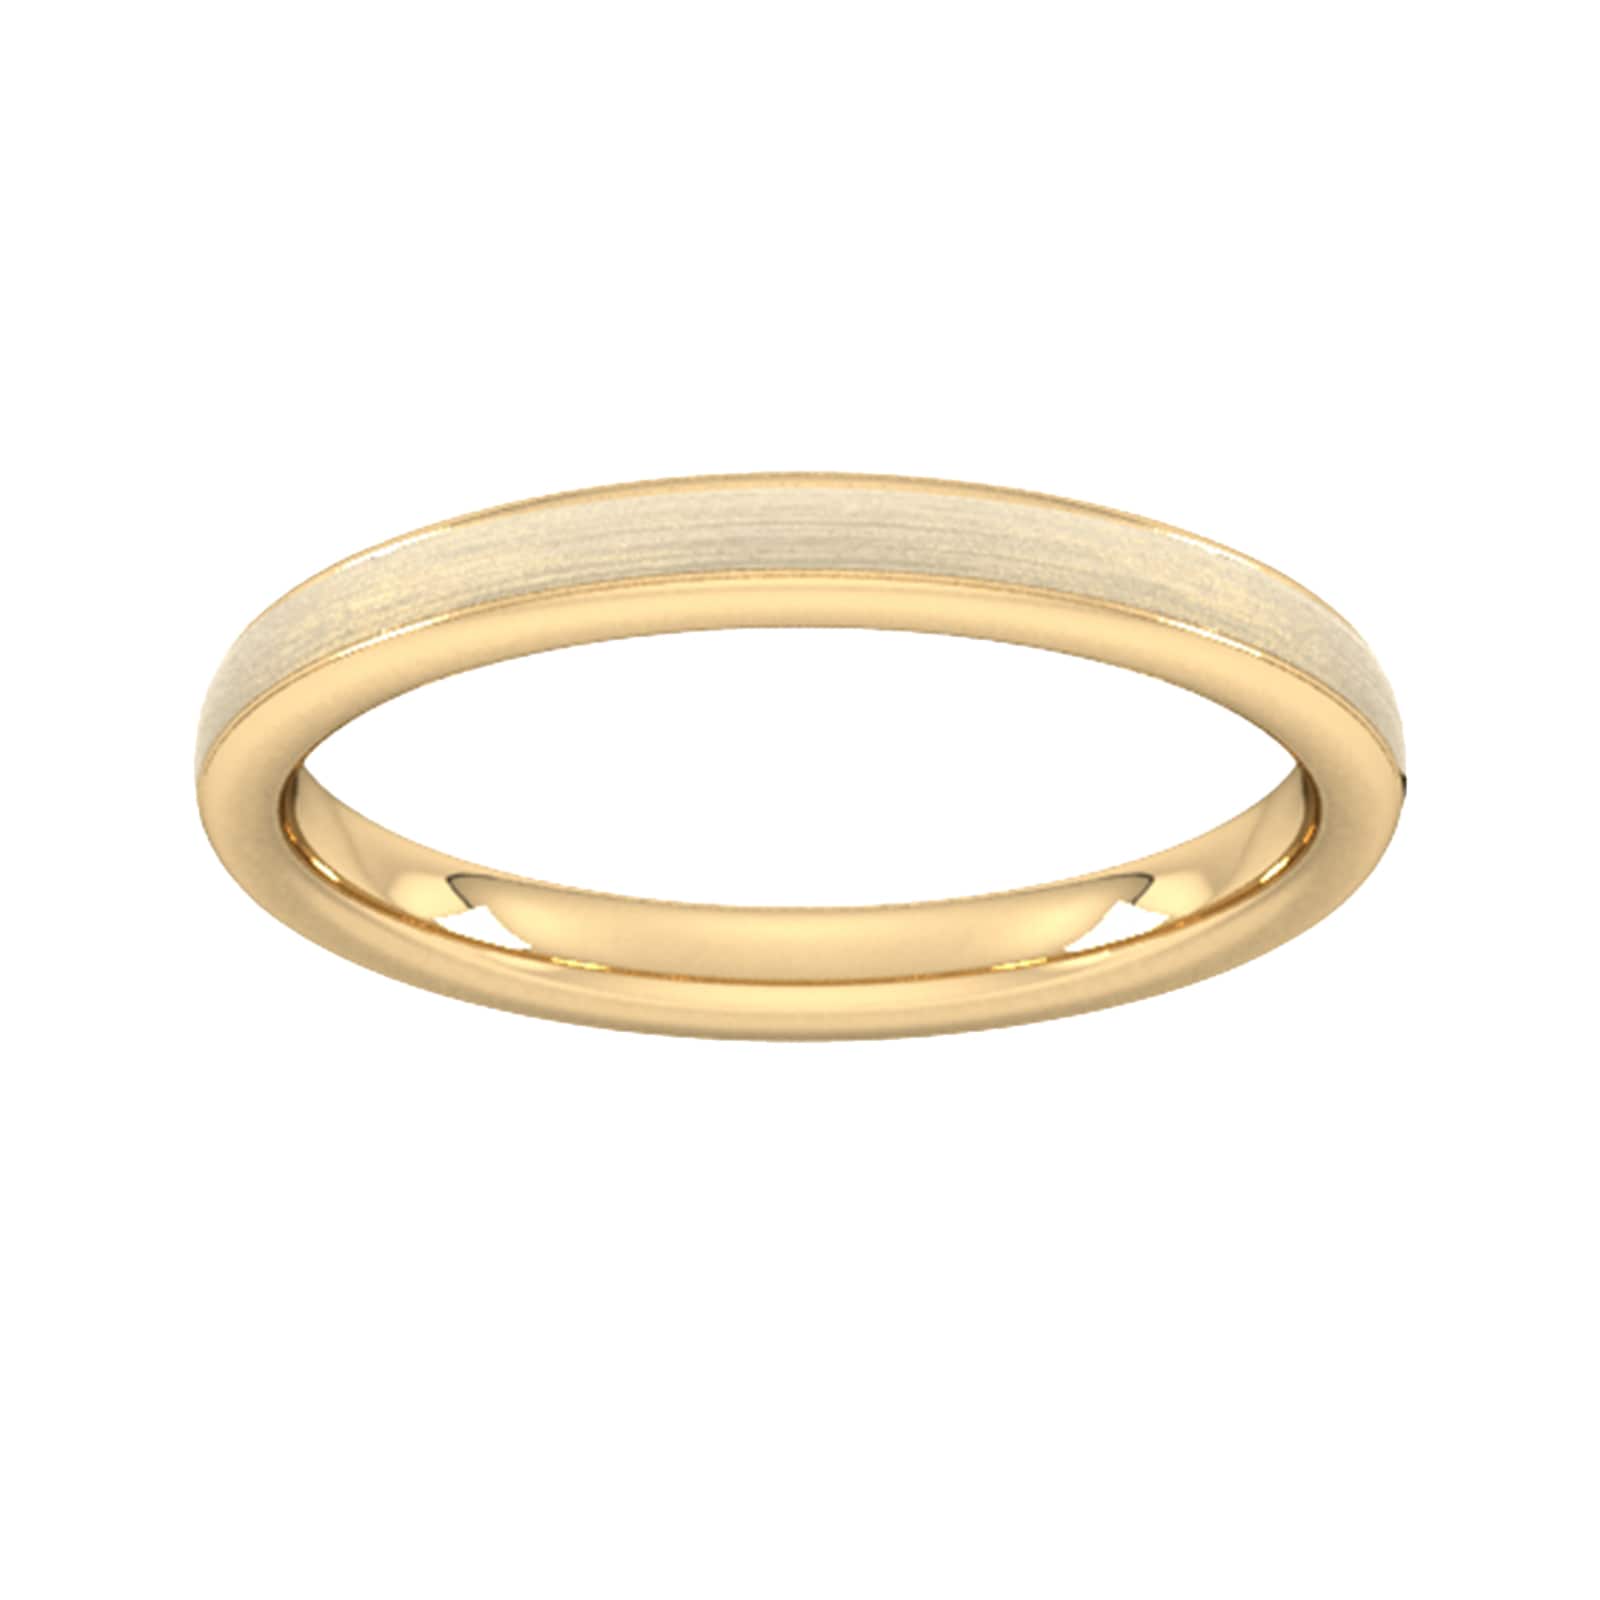 2.5mm D Shape Heavy Matt Centre With Grooves Wedding Ring In 18 Carat Yellow Gold - Ring Size G